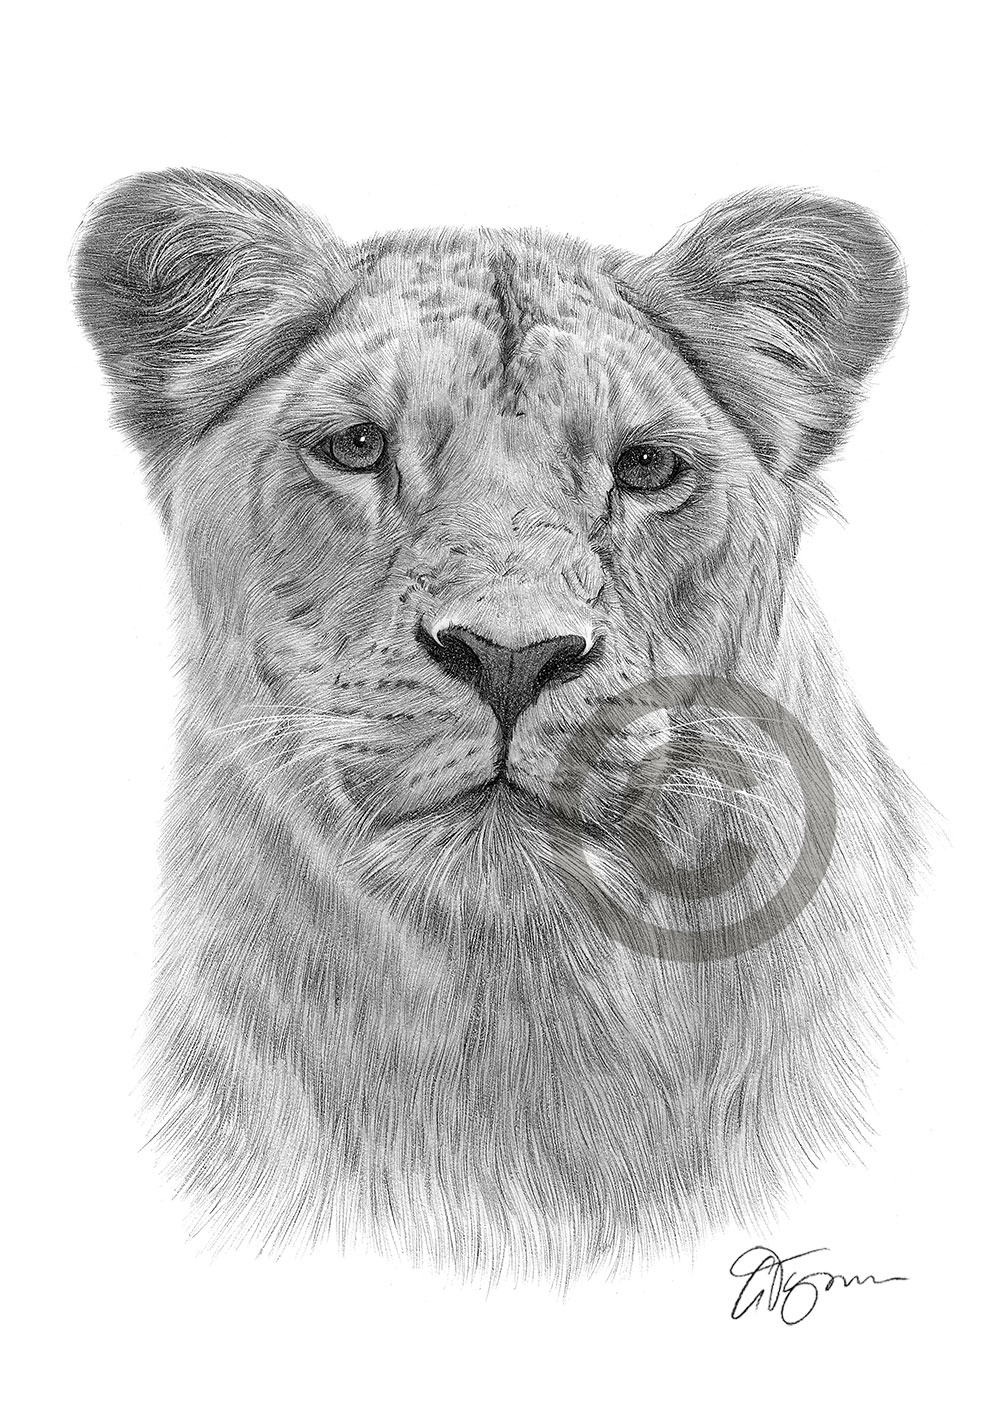 Pencil drawing of a lioness by UK artist Gary Tymon